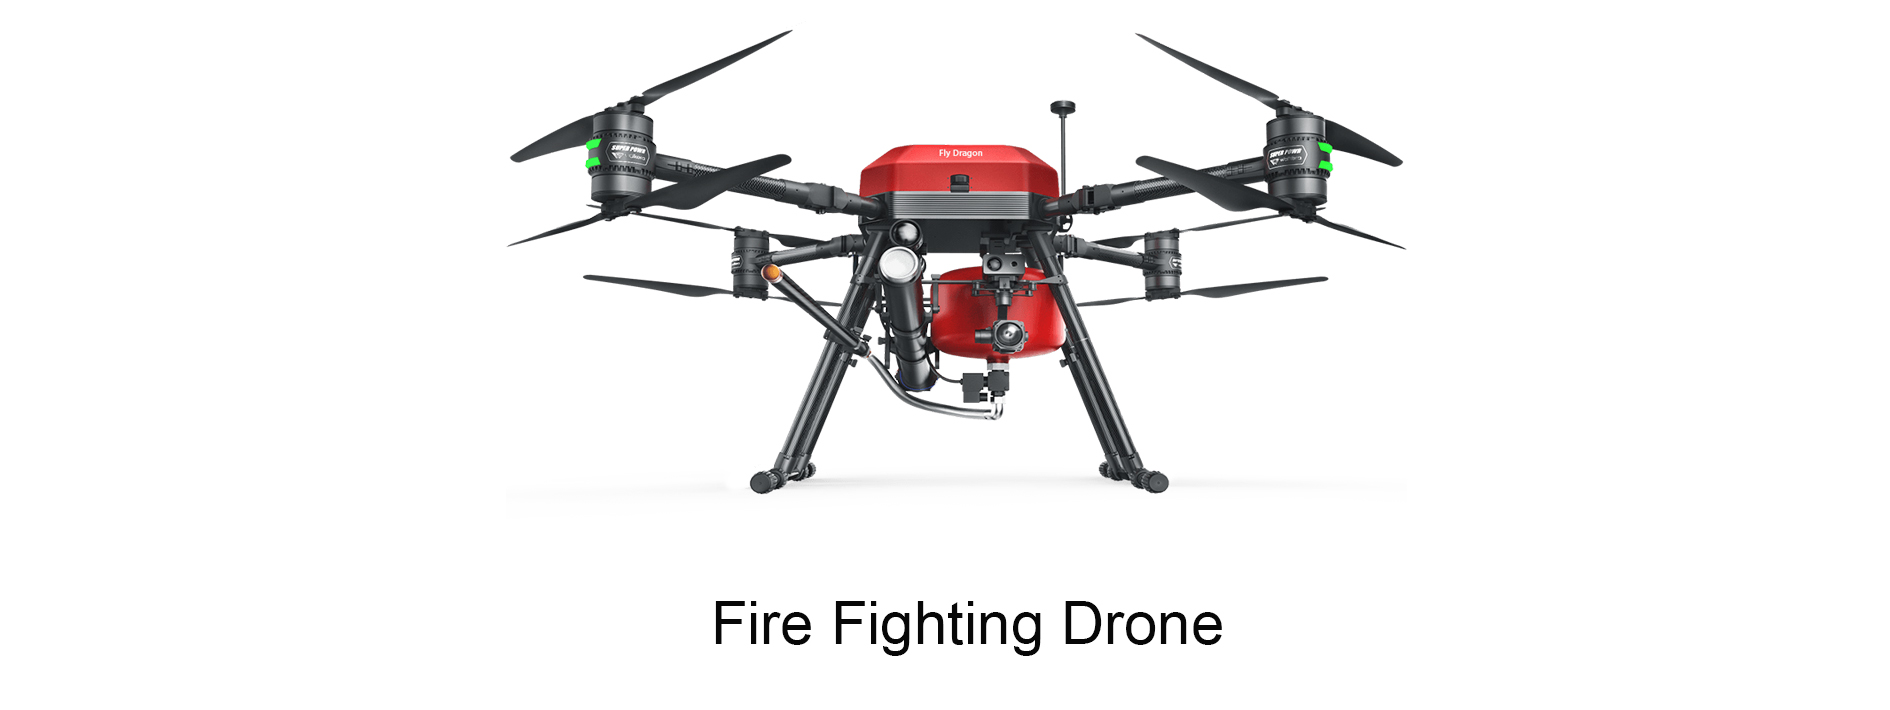 Fire fighting drone